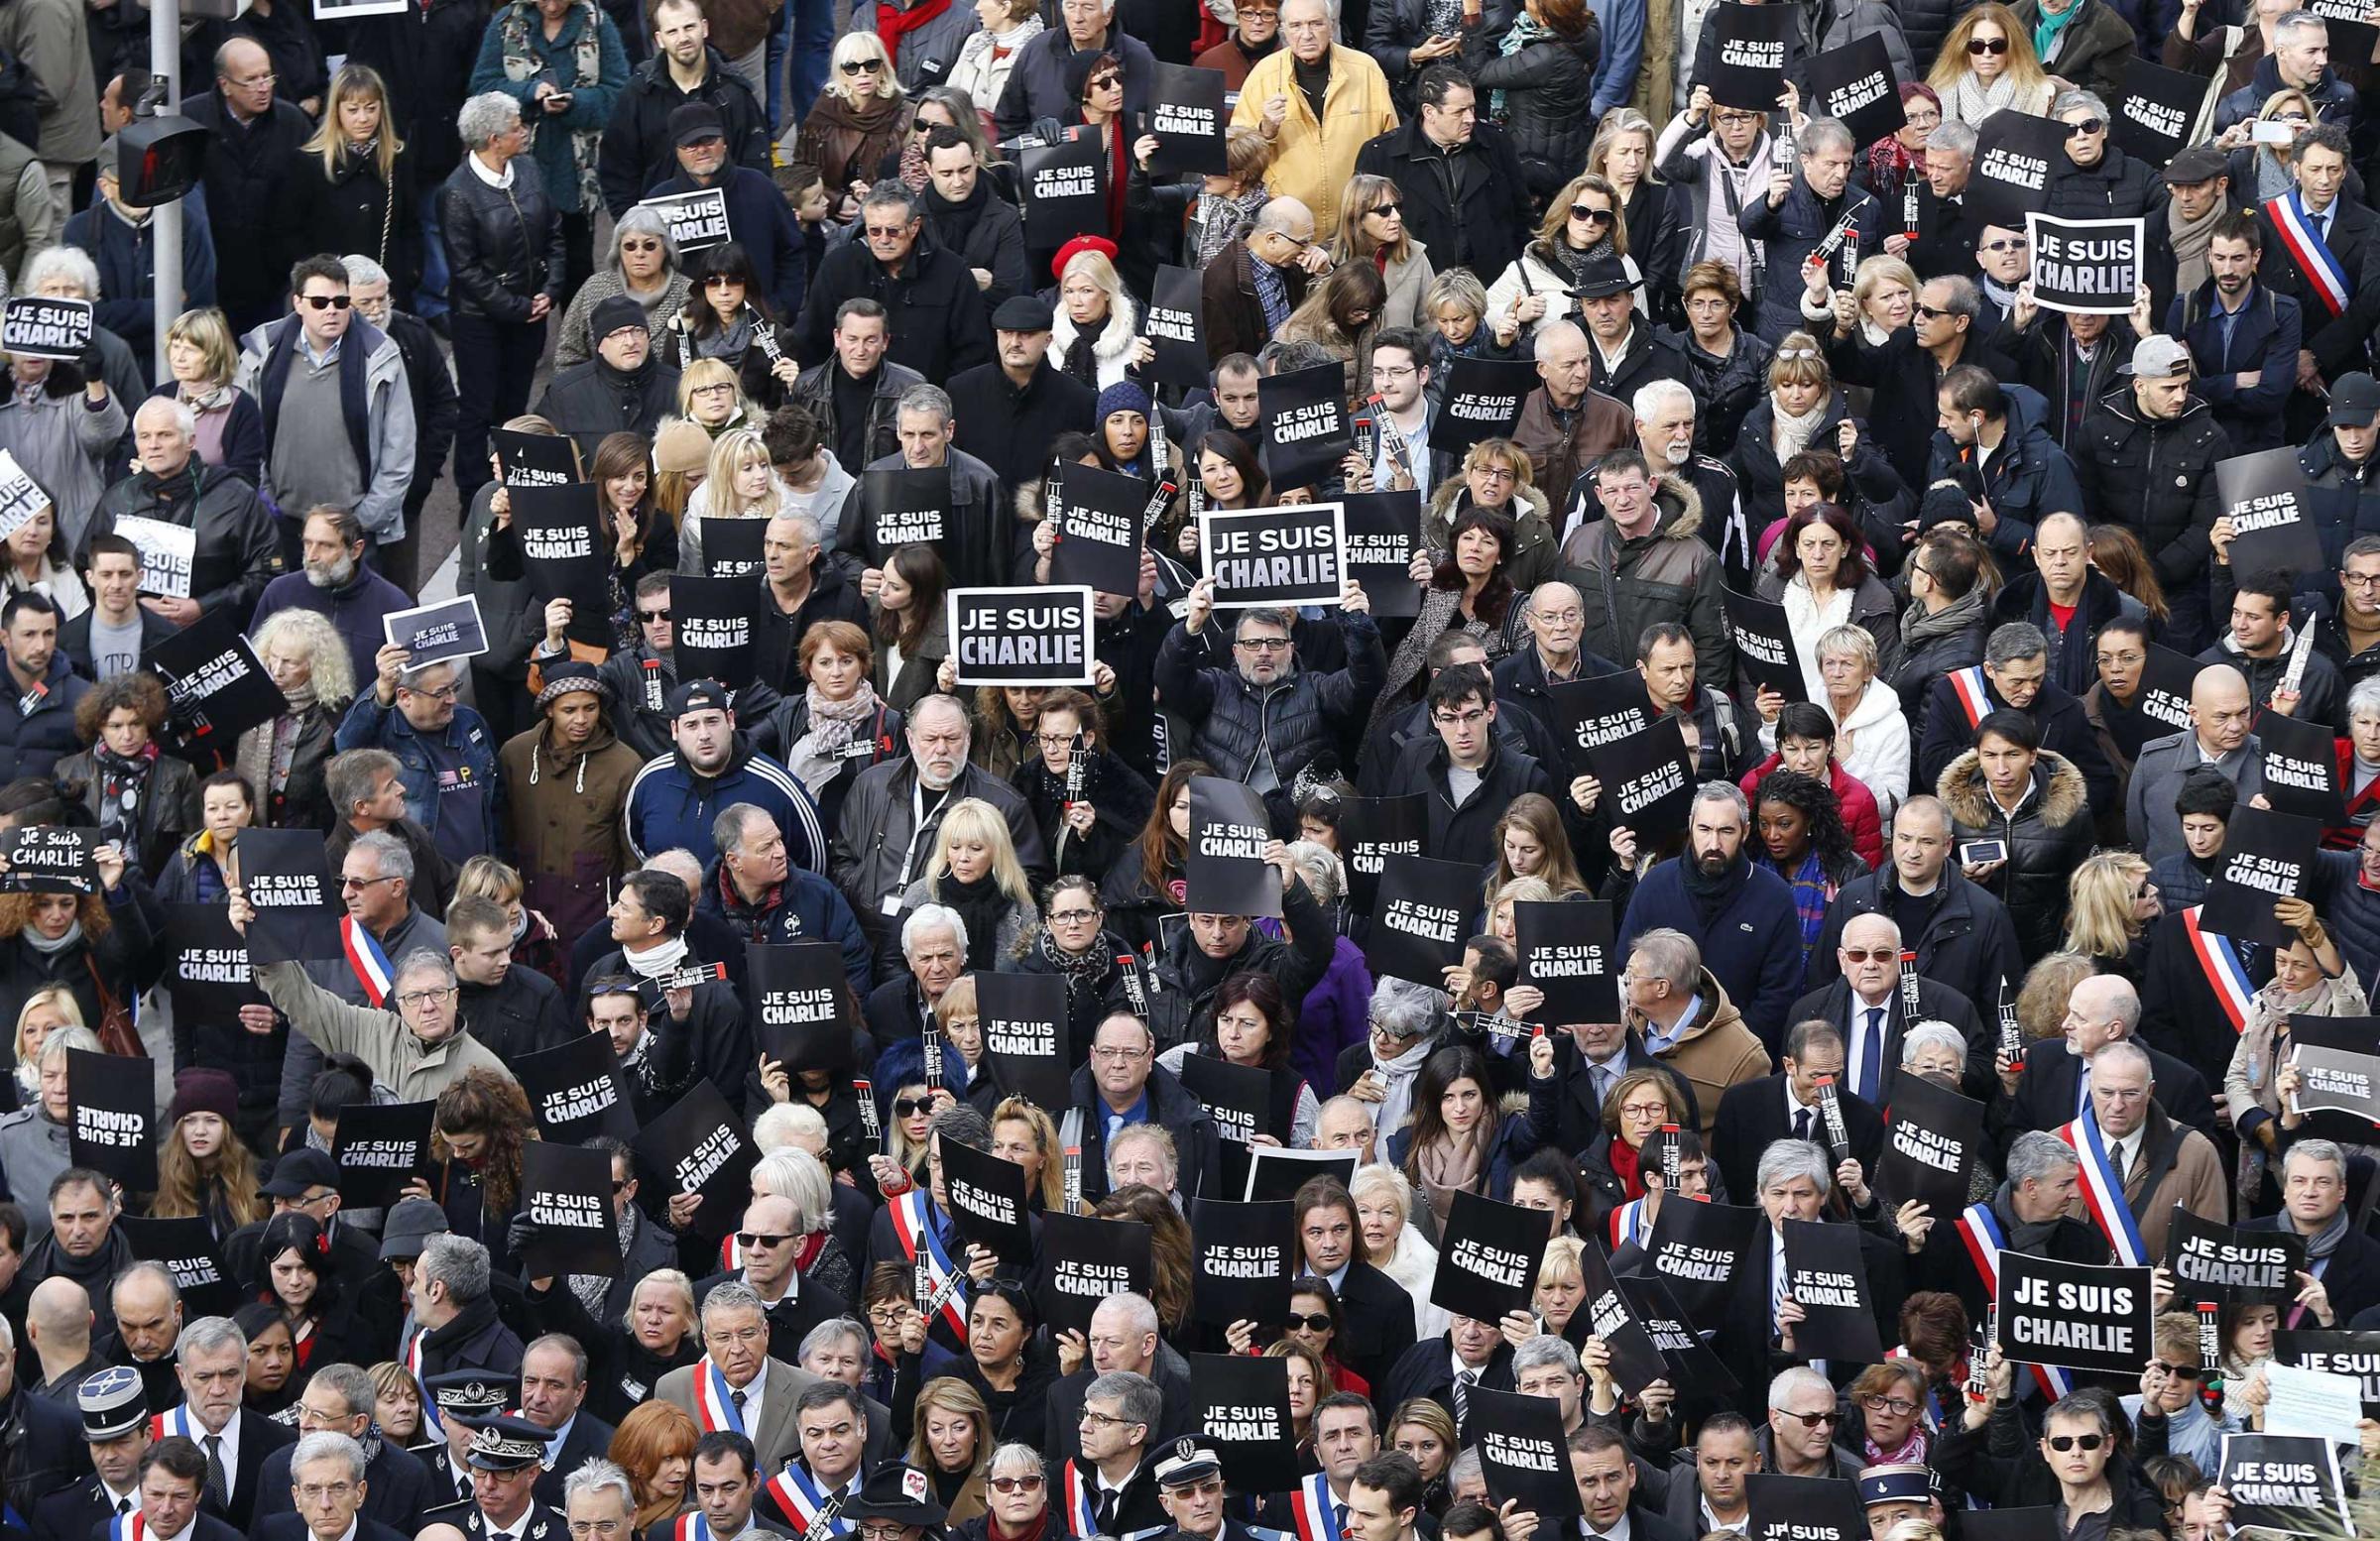 Tens of thousands of people some holding up signs that read, "Je suis Charlie" march during a rally along the sea front in the Mediterranean city of Nice, on January 10, 2015.